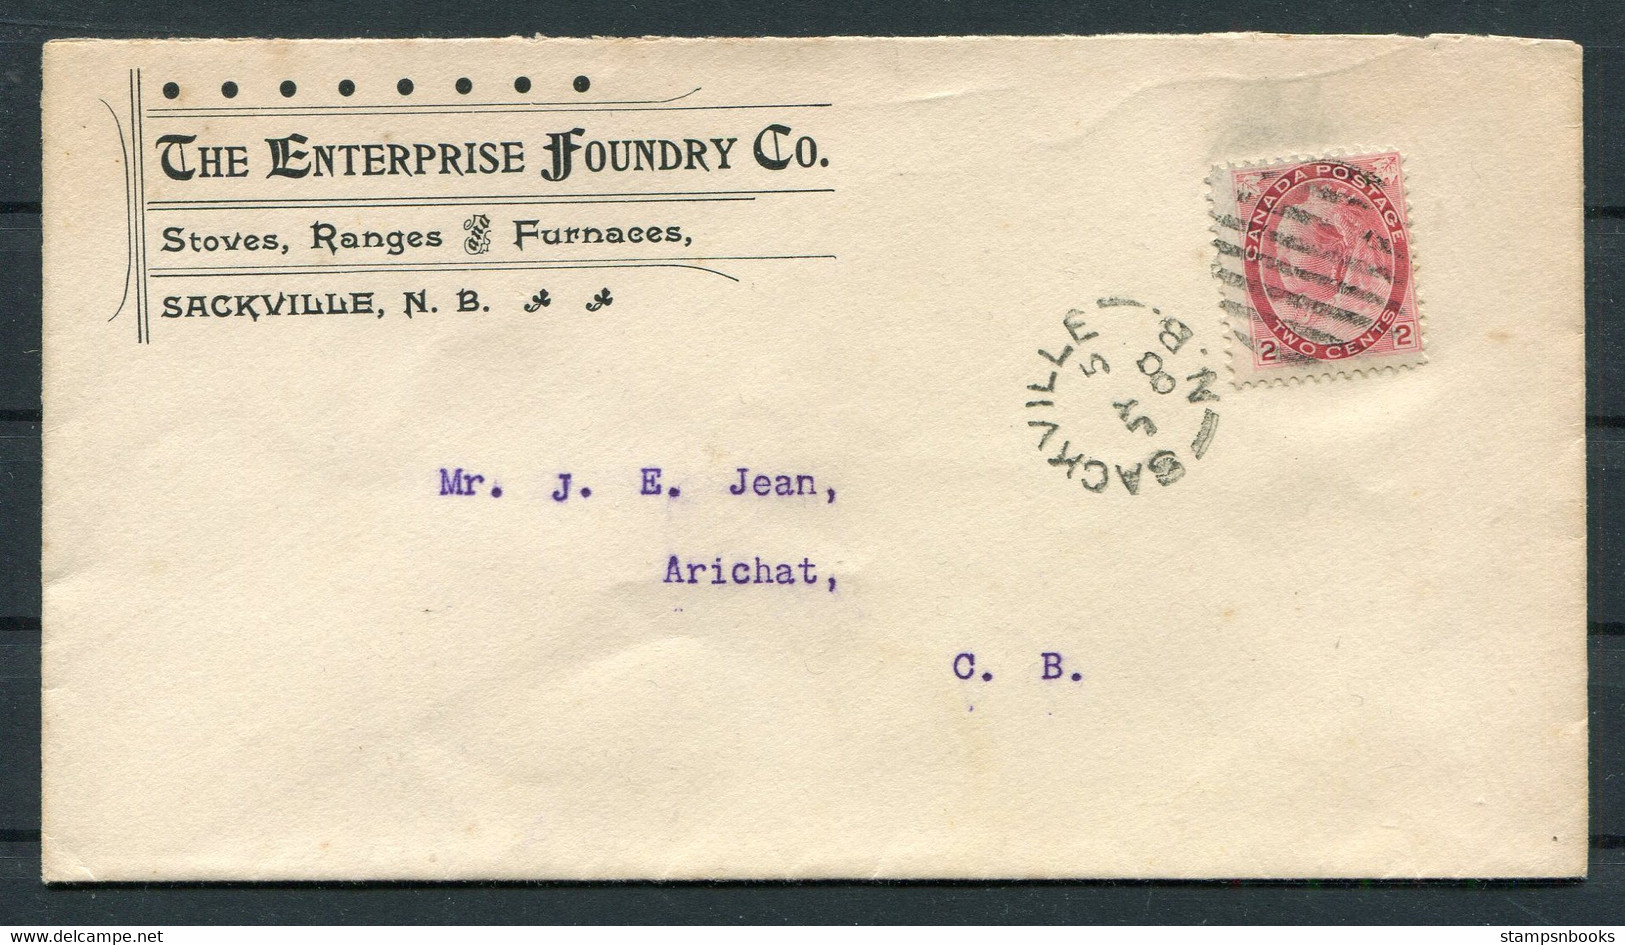 1900 Canada Enterprise Foundry Co. Sackville N.B. Cover - Arichat N.S. - Covers & Documents